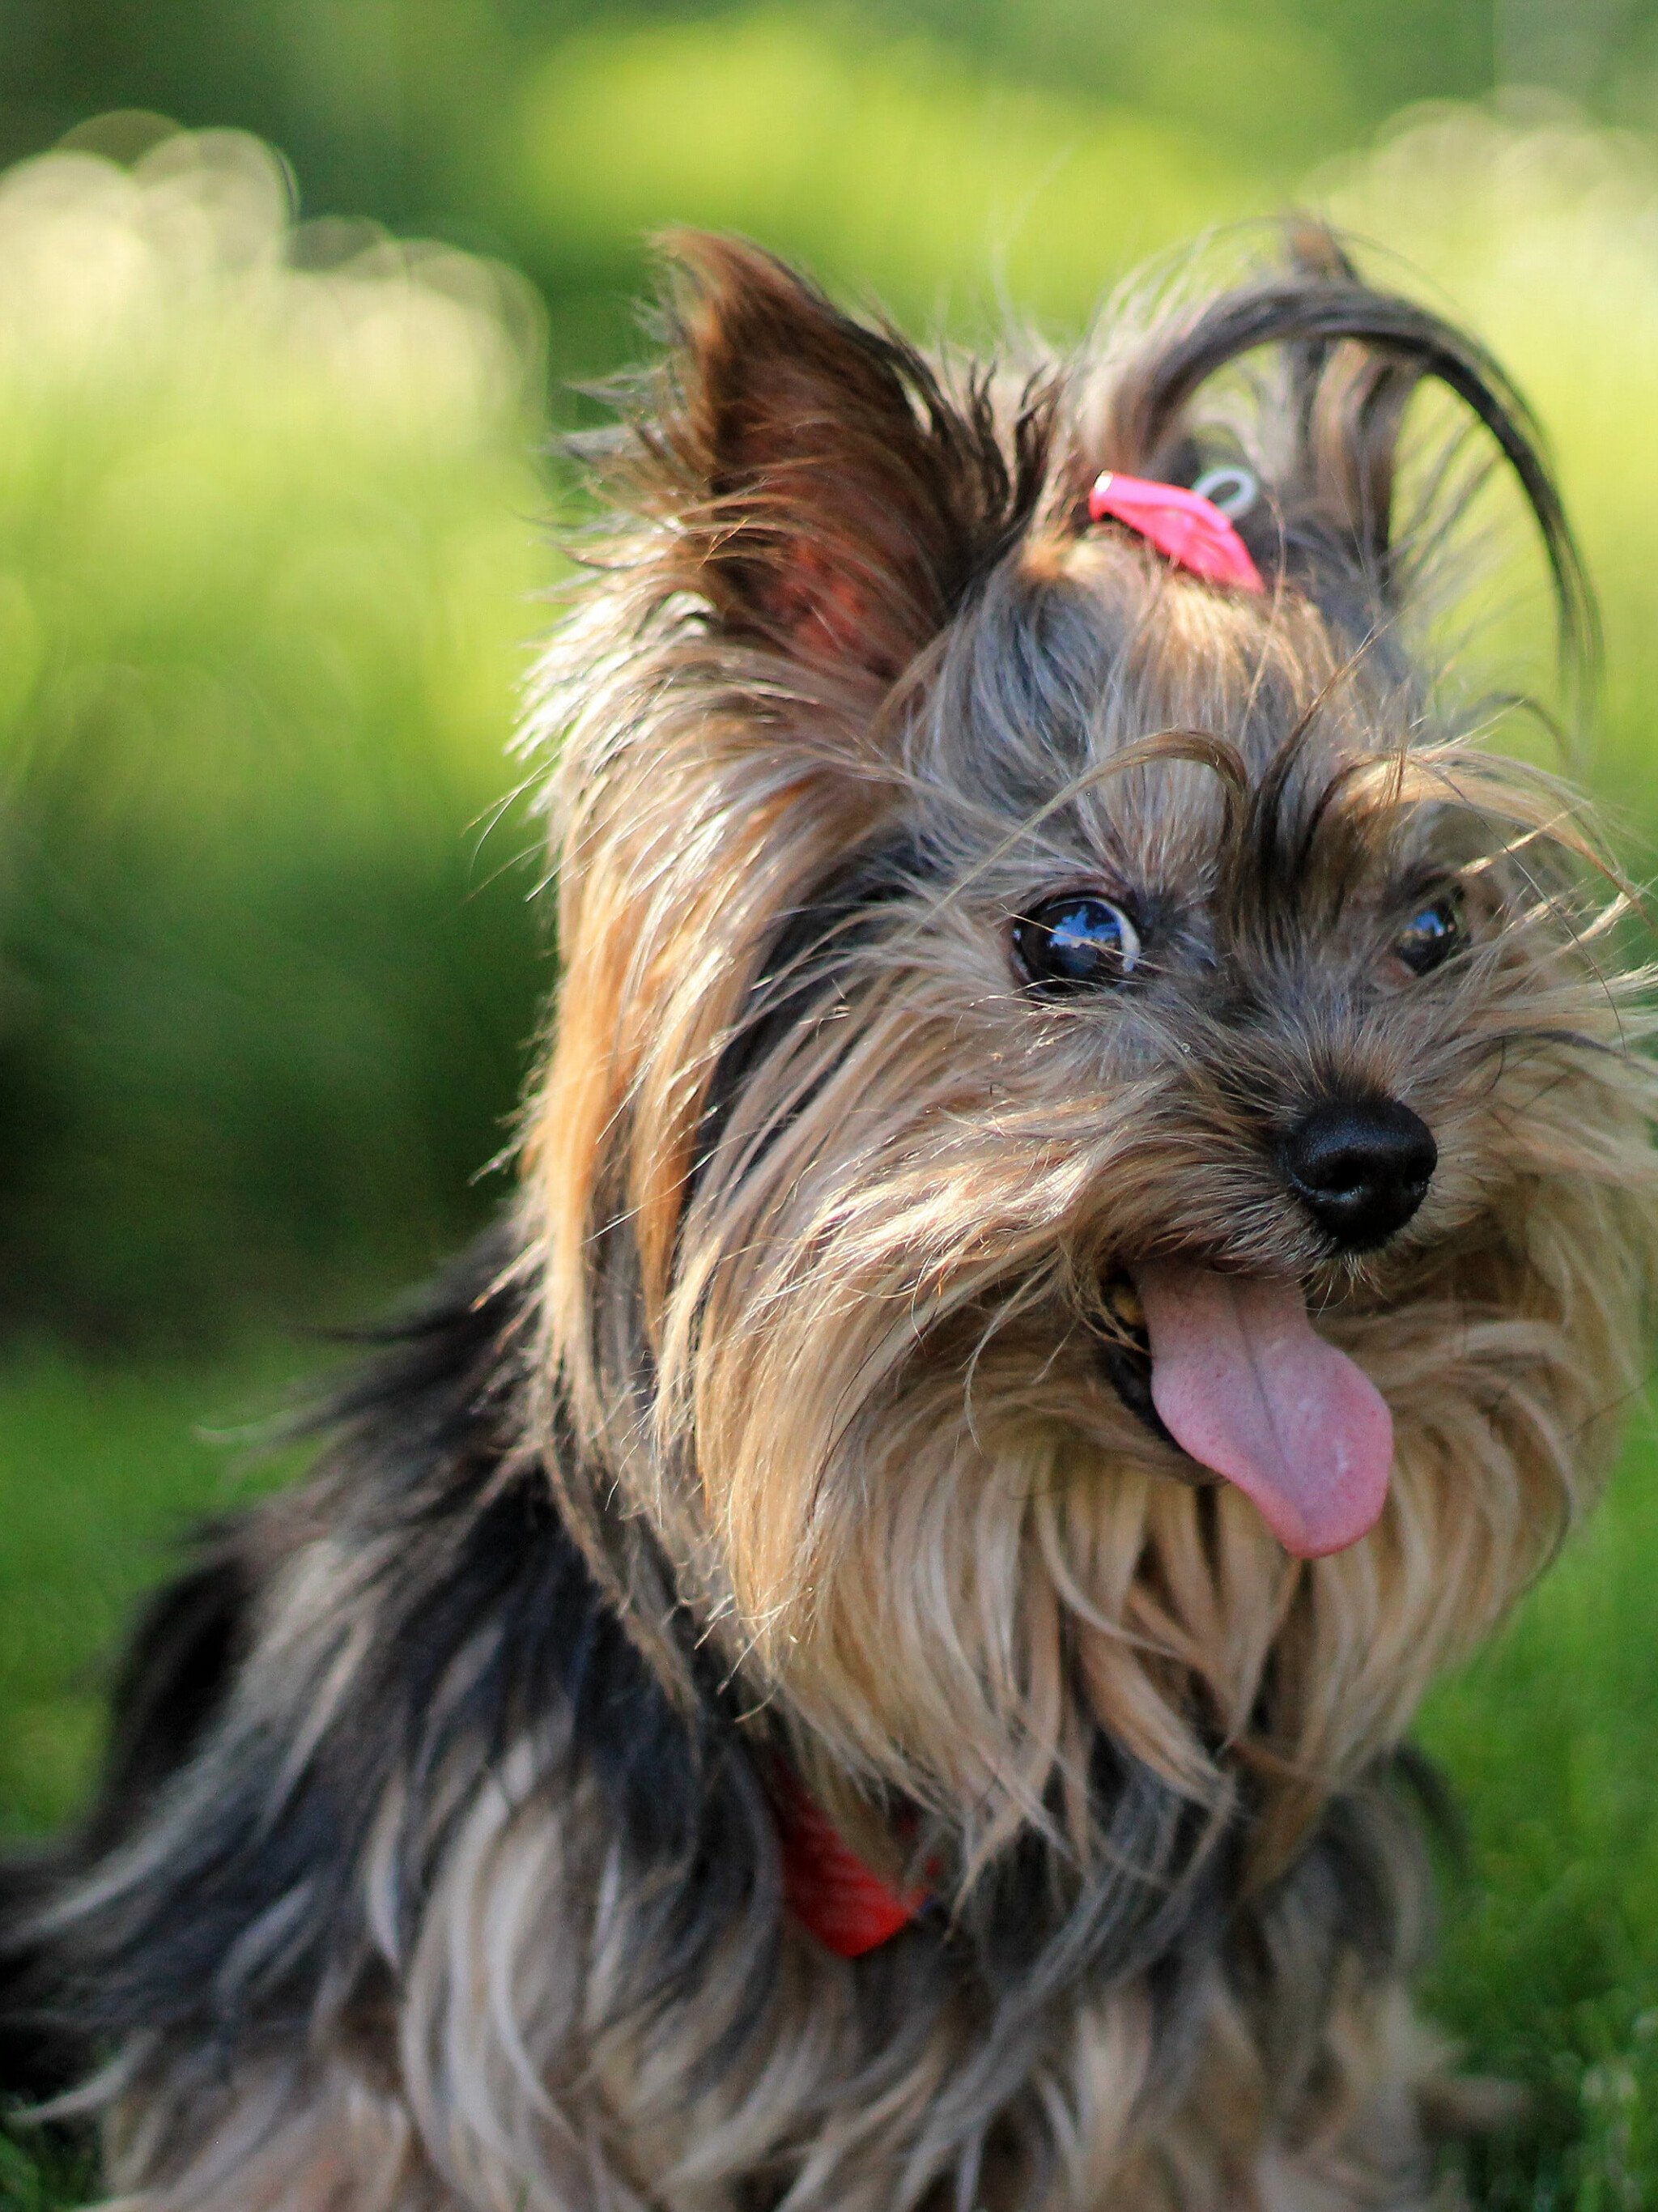 Yorkshire Terrier: A small tan dog with a blue saddle, Companion dog. 2050x2740 HD Wallpaper.